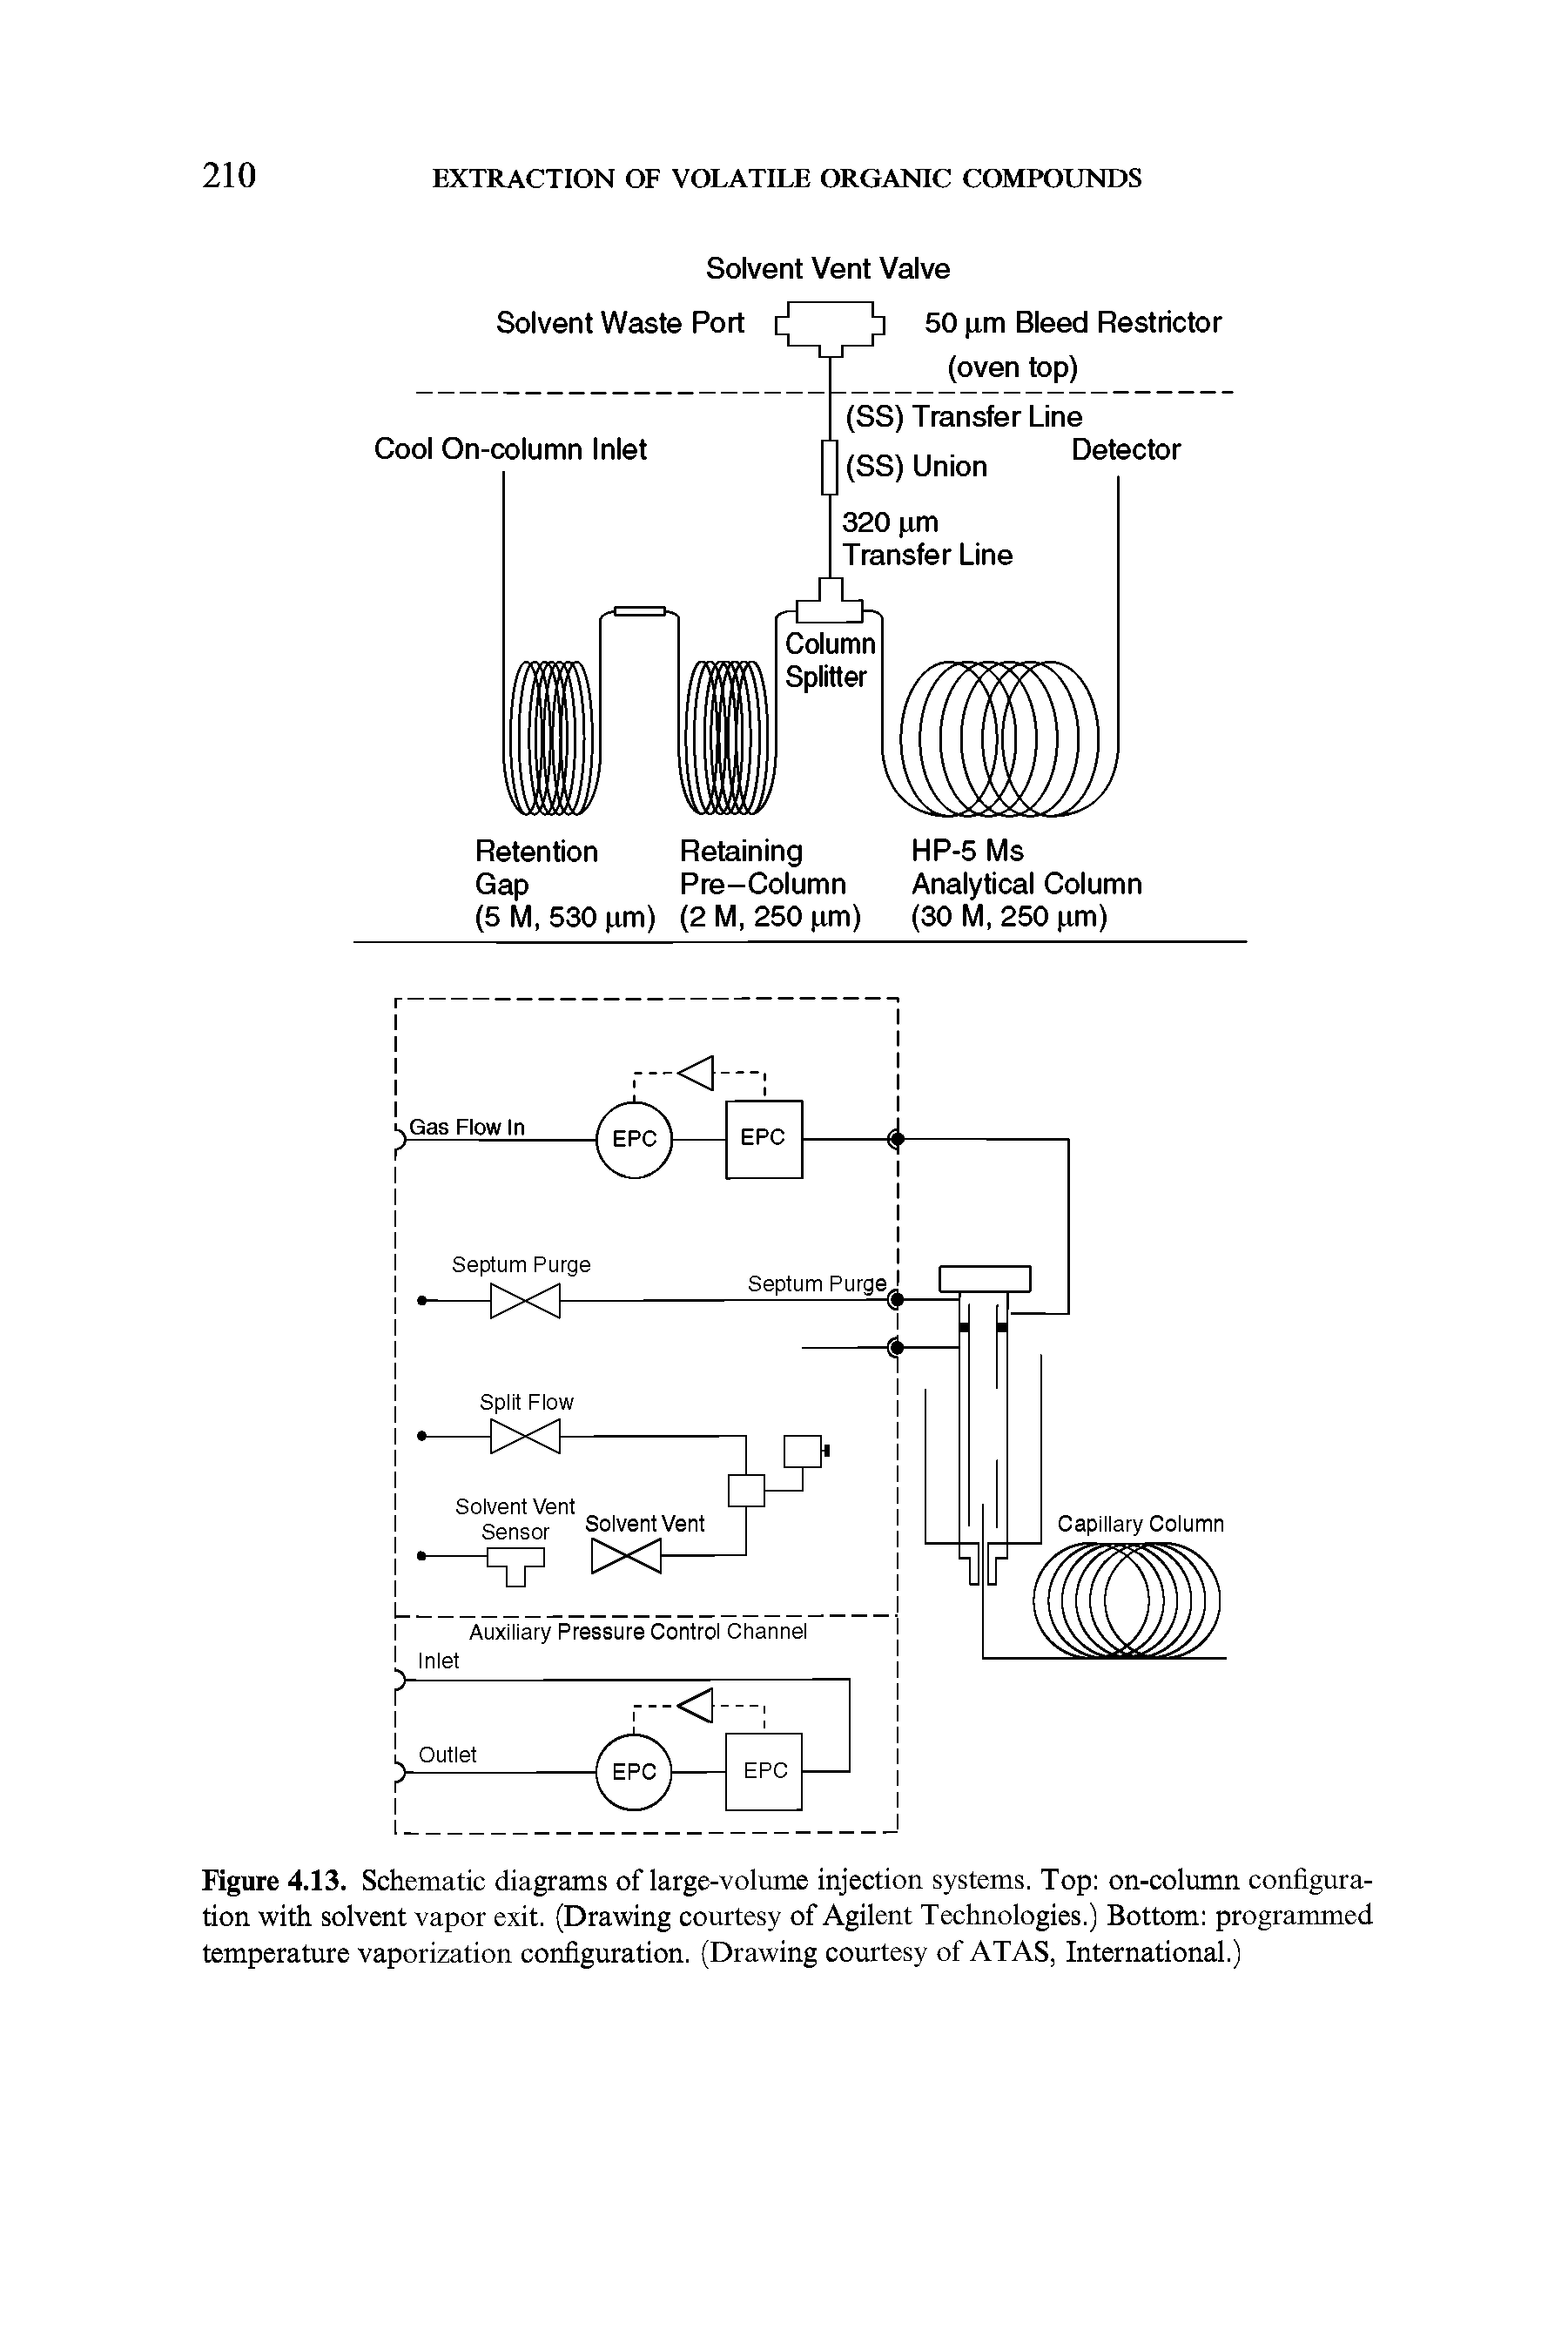 Figure 4.13. Schematic diagrams of large-volume injection systems. Top on-column configuration with solvent vapor exit. (Drawing courtesy of Agilent Technologies.) Bottom programmed temperature vaporization configuration. (Drawing courtesy of ATAS, International.)...